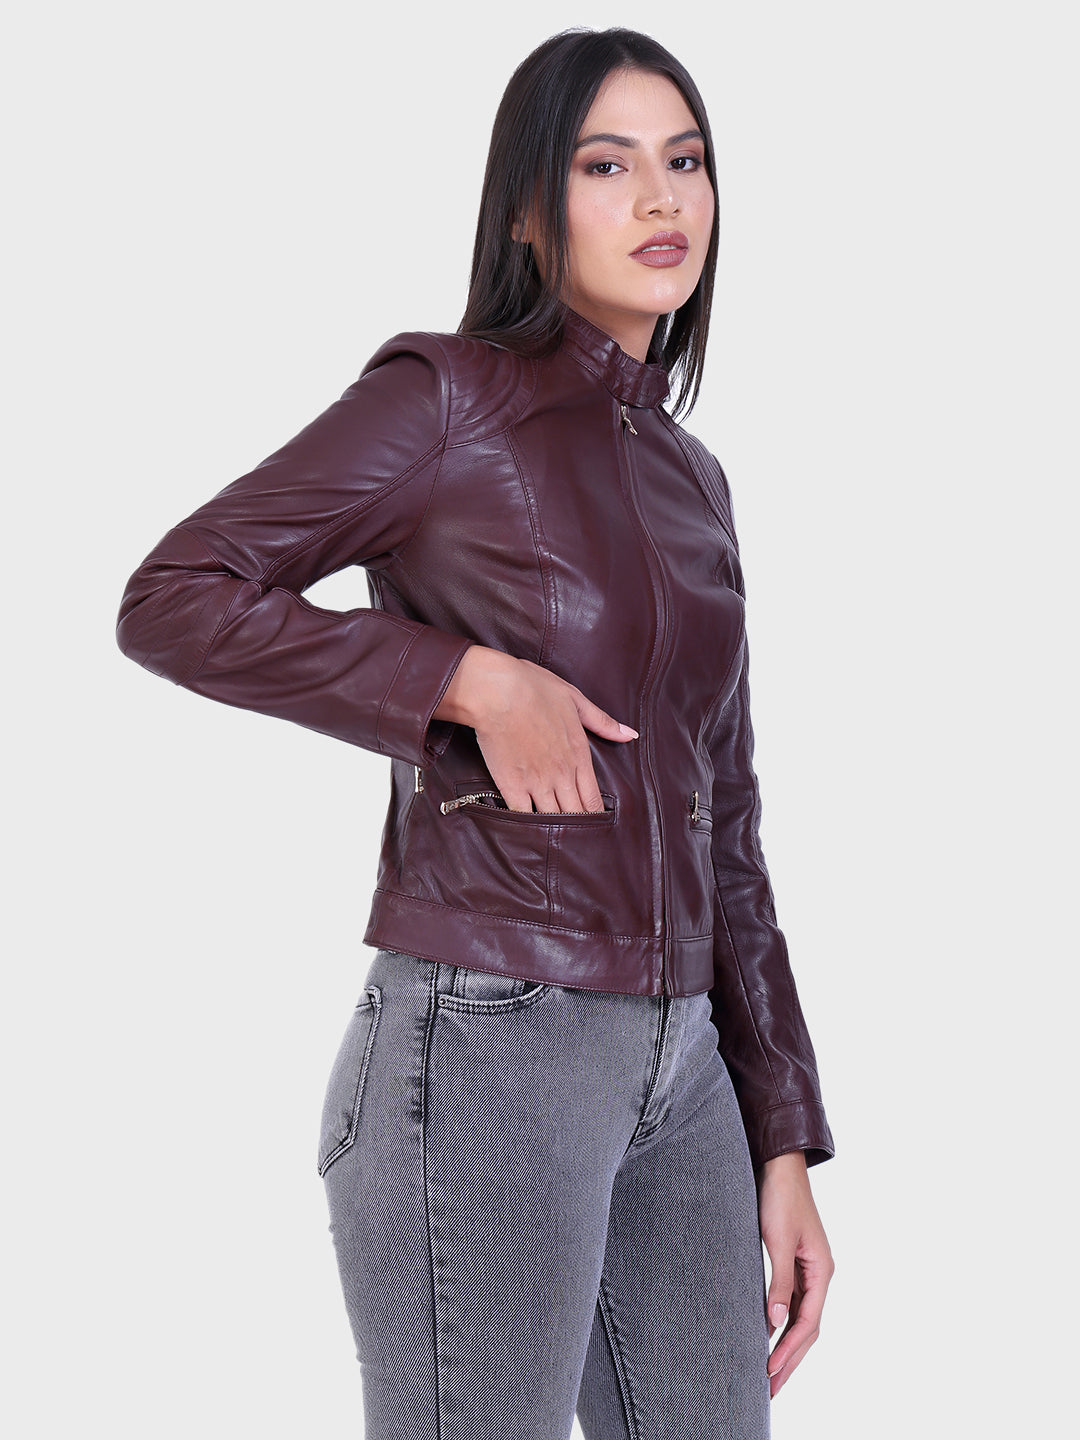 Justanned Chianti Leather Jacket